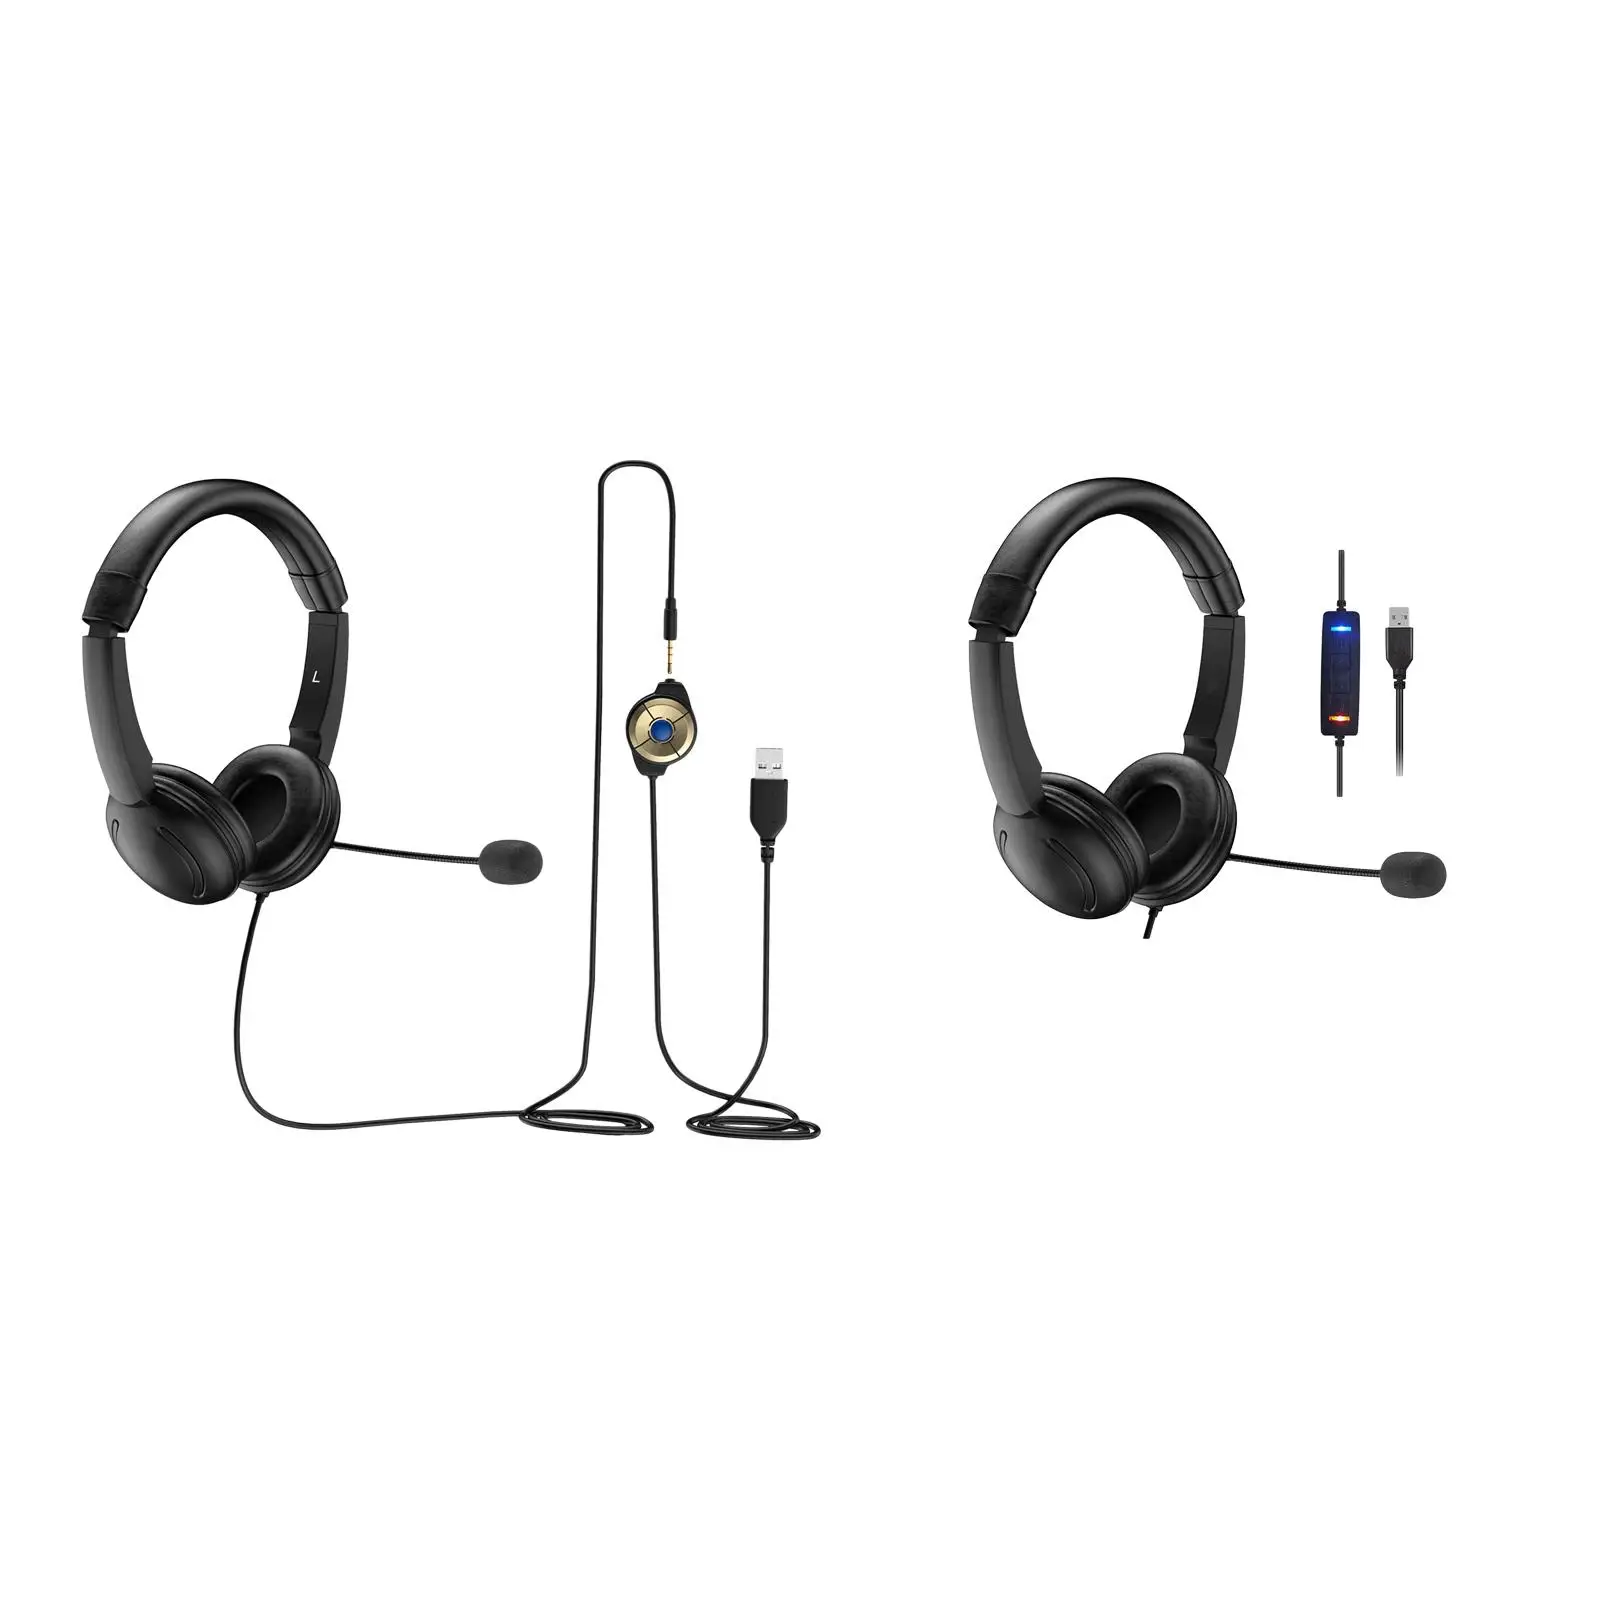 USB Headset Premium Plug and Play Comfort with in Line Controls Speaker Headphones for Home Laptop PC Call Center Video Meetings